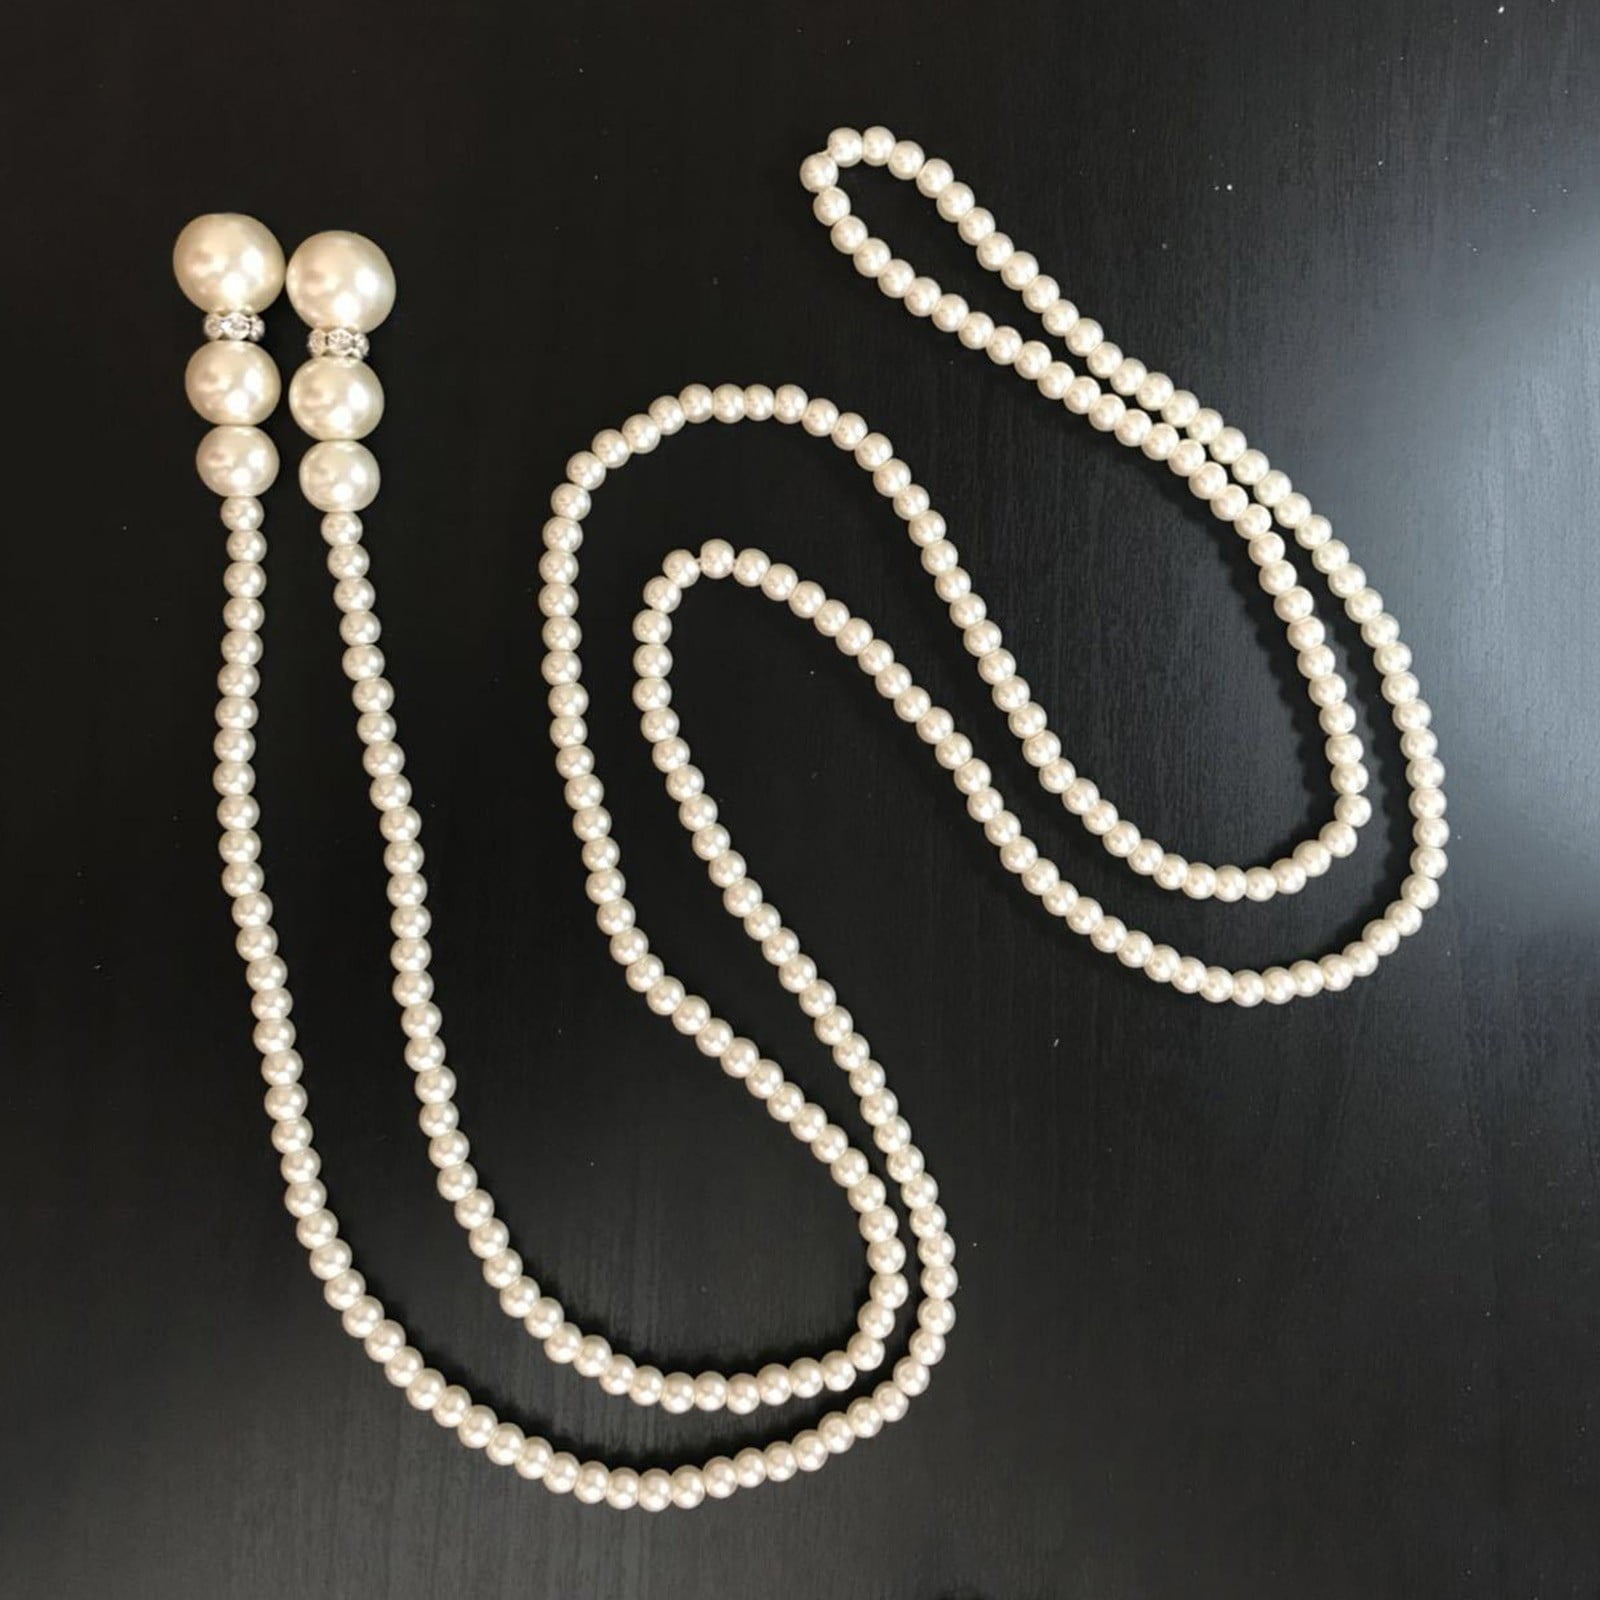 BABEYOND 1920s Gatsby Pearl Necklace Vintage Bridal Pearl Necklace